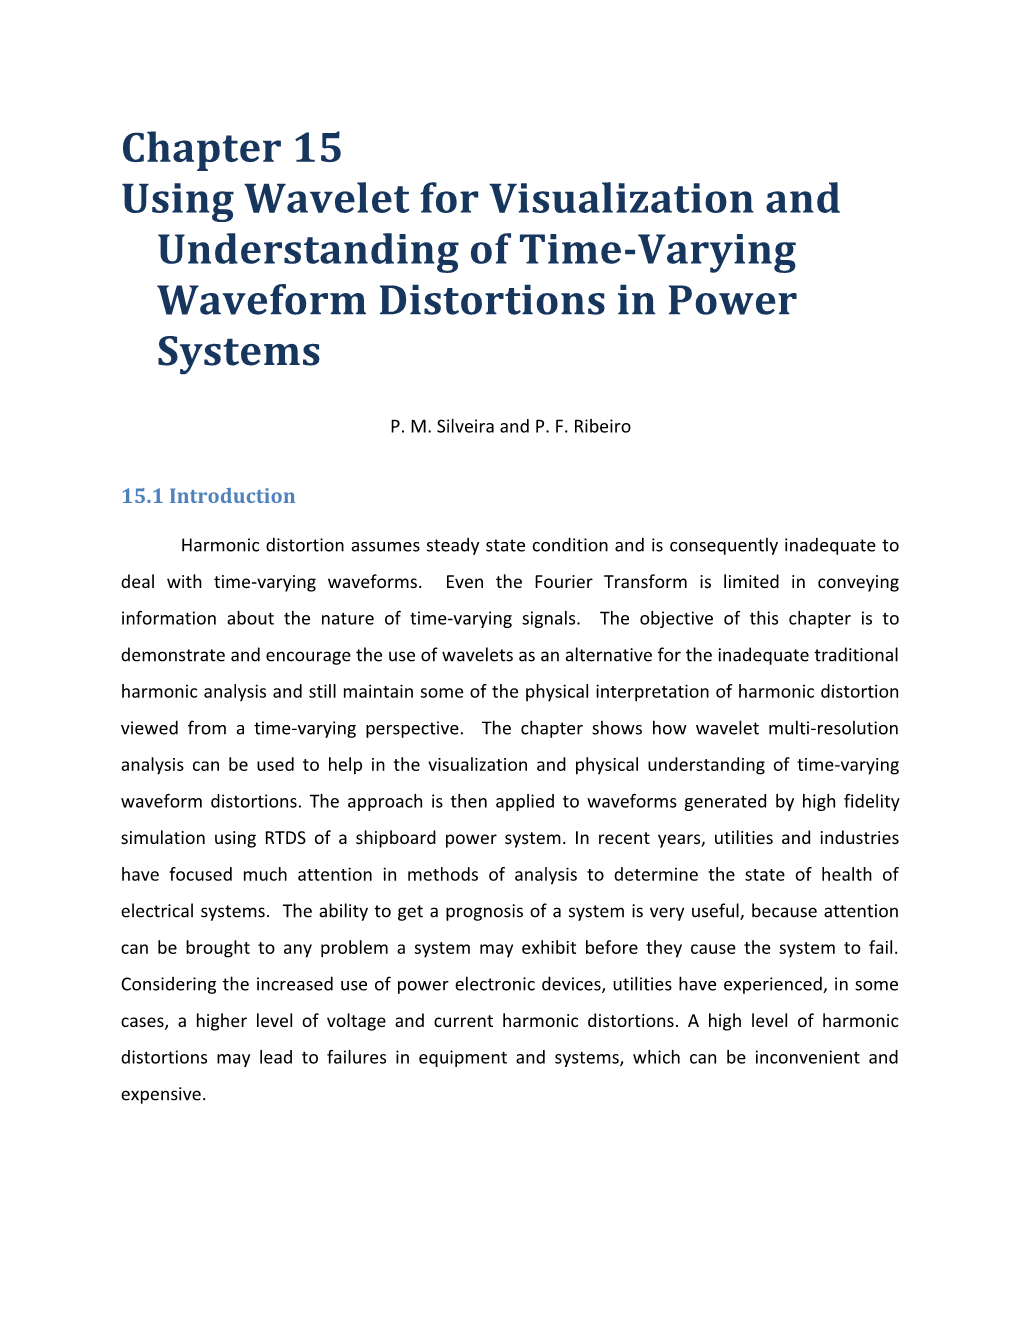 Using Wavelet for Visualization and Understanding of Time-Varying Waveform Distortions